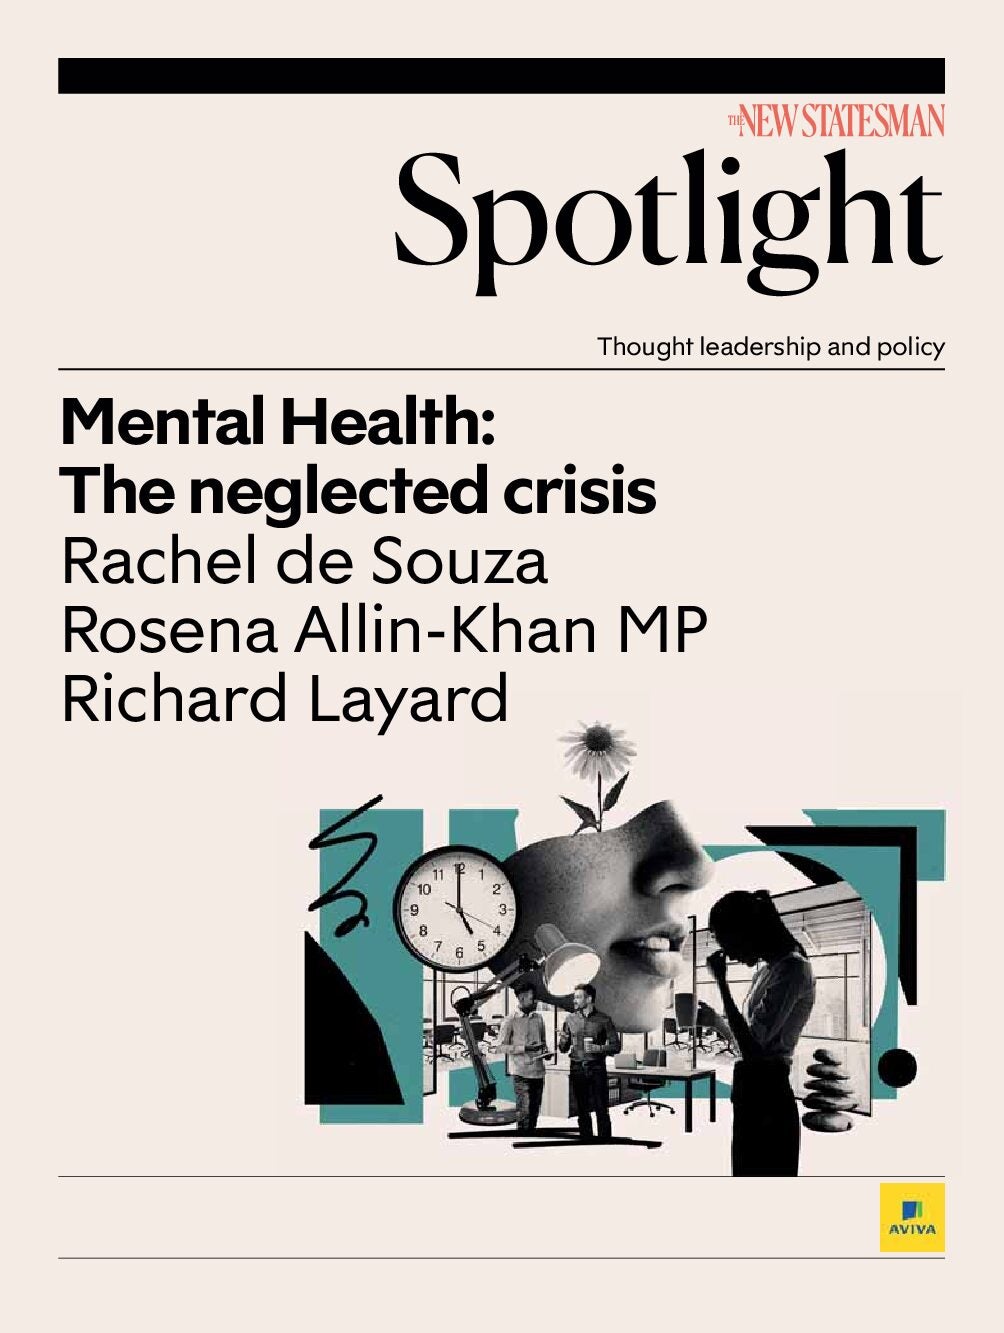 Mental Health: The neglected crisis